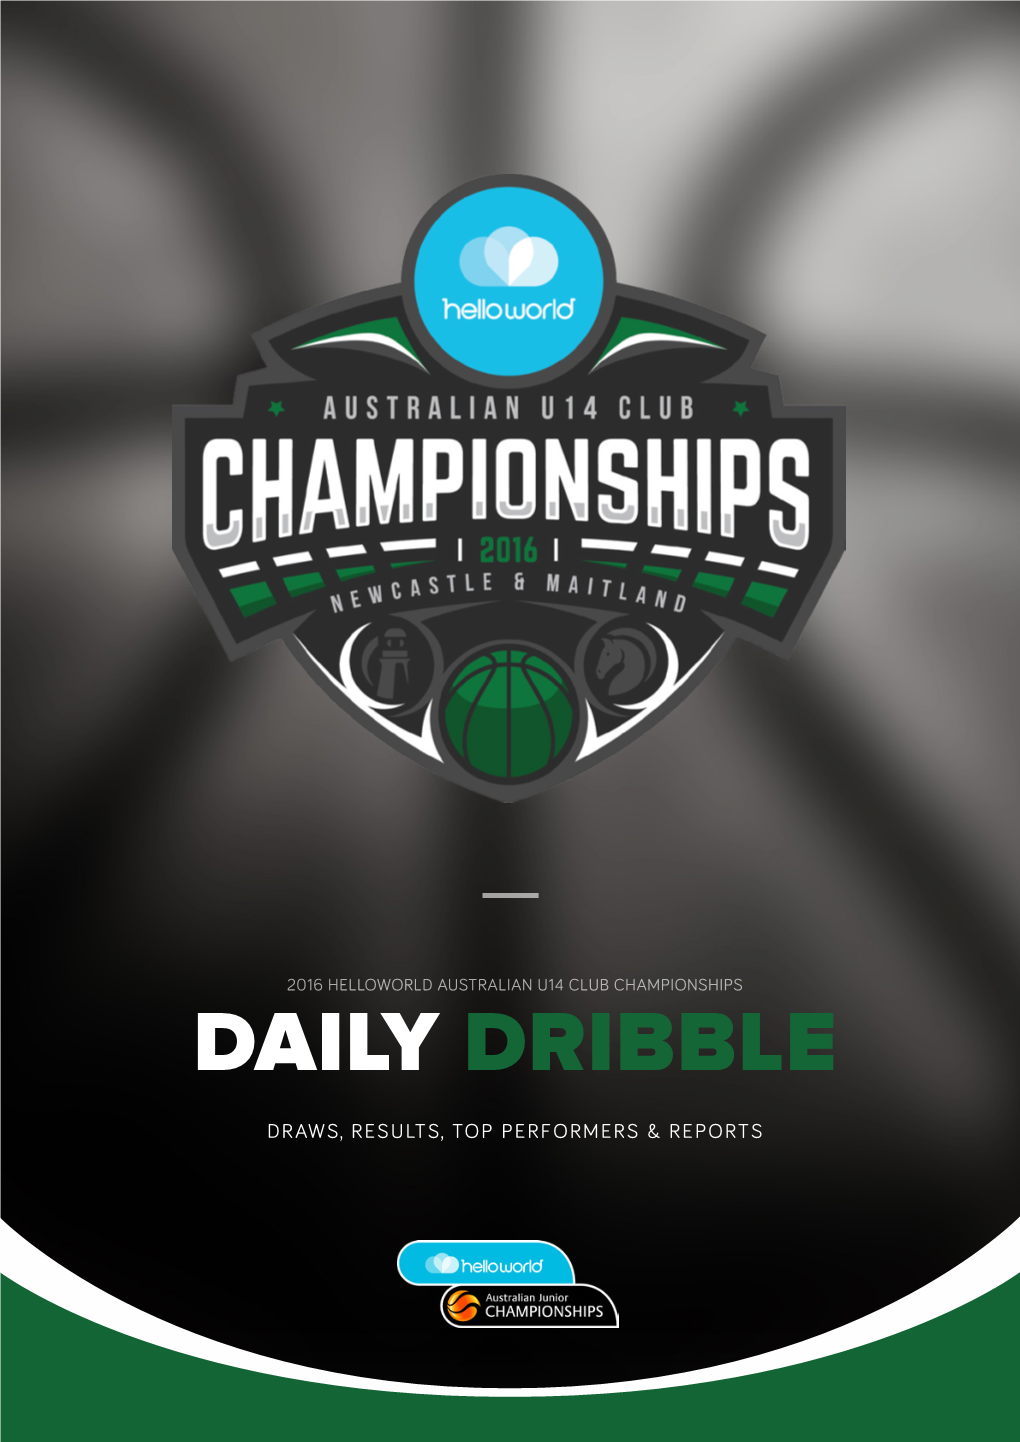 Daily Dribble Draws, Results, Top Performers & Reports